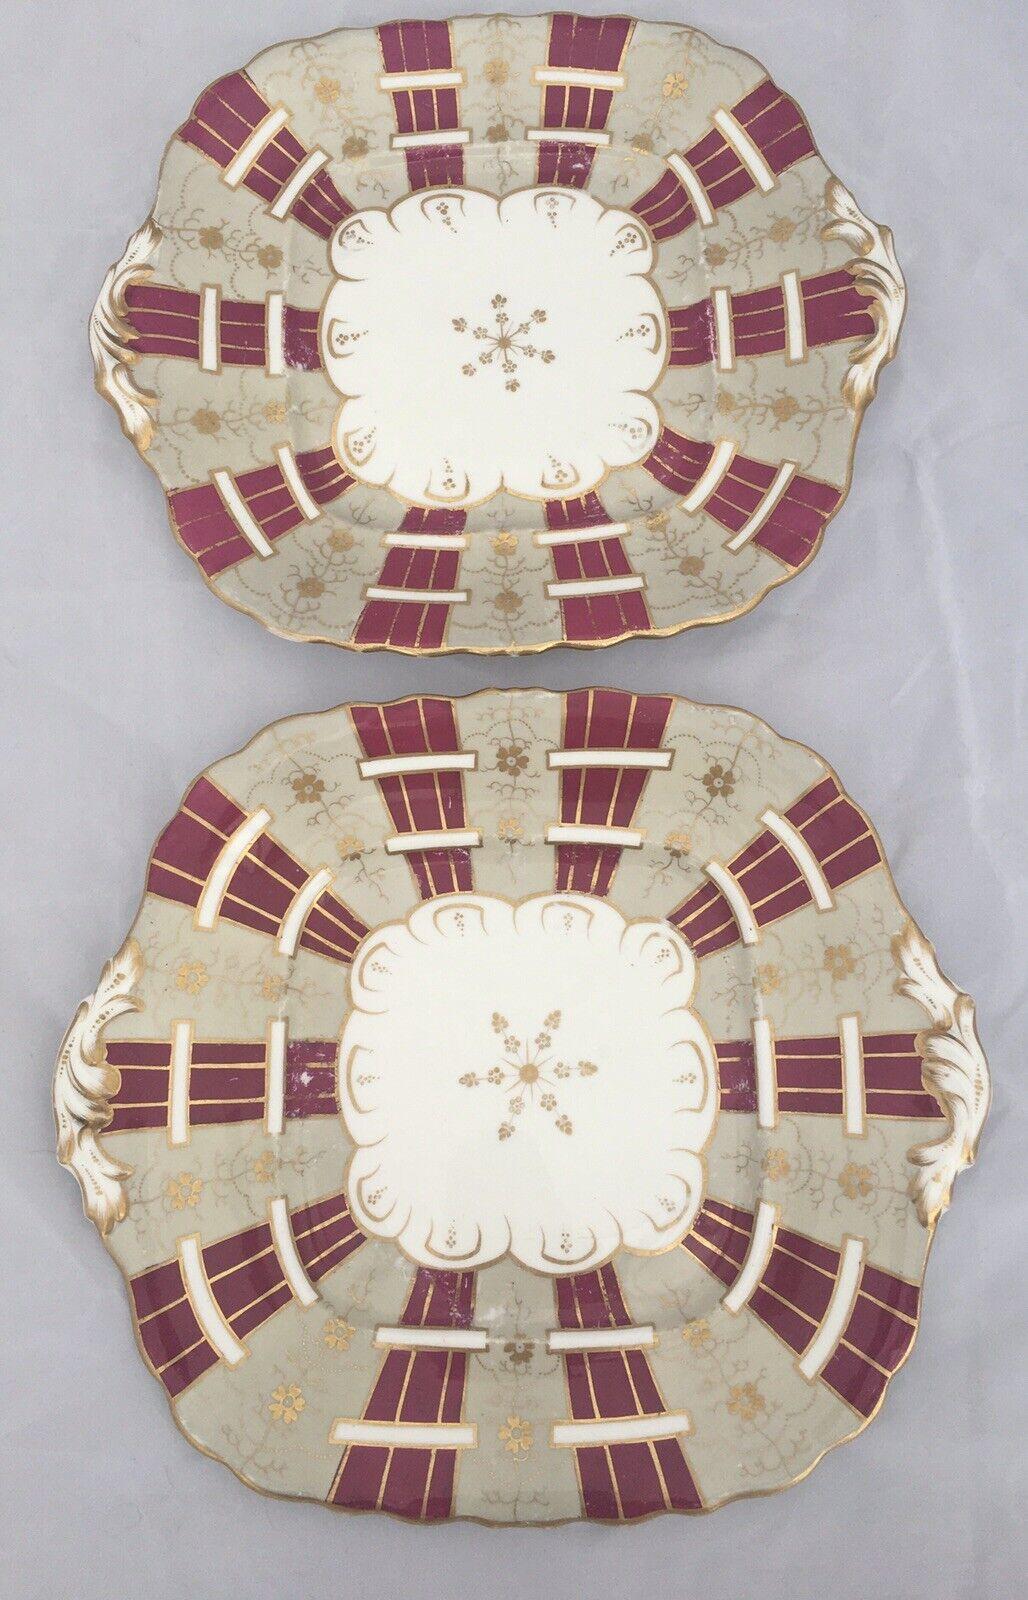 Pair Antique Porcelain Square Shaped Dessert Plates with Integral Handles Maroon Striped and Gilded Possibly Ridgway pattern 6709 circa 1840